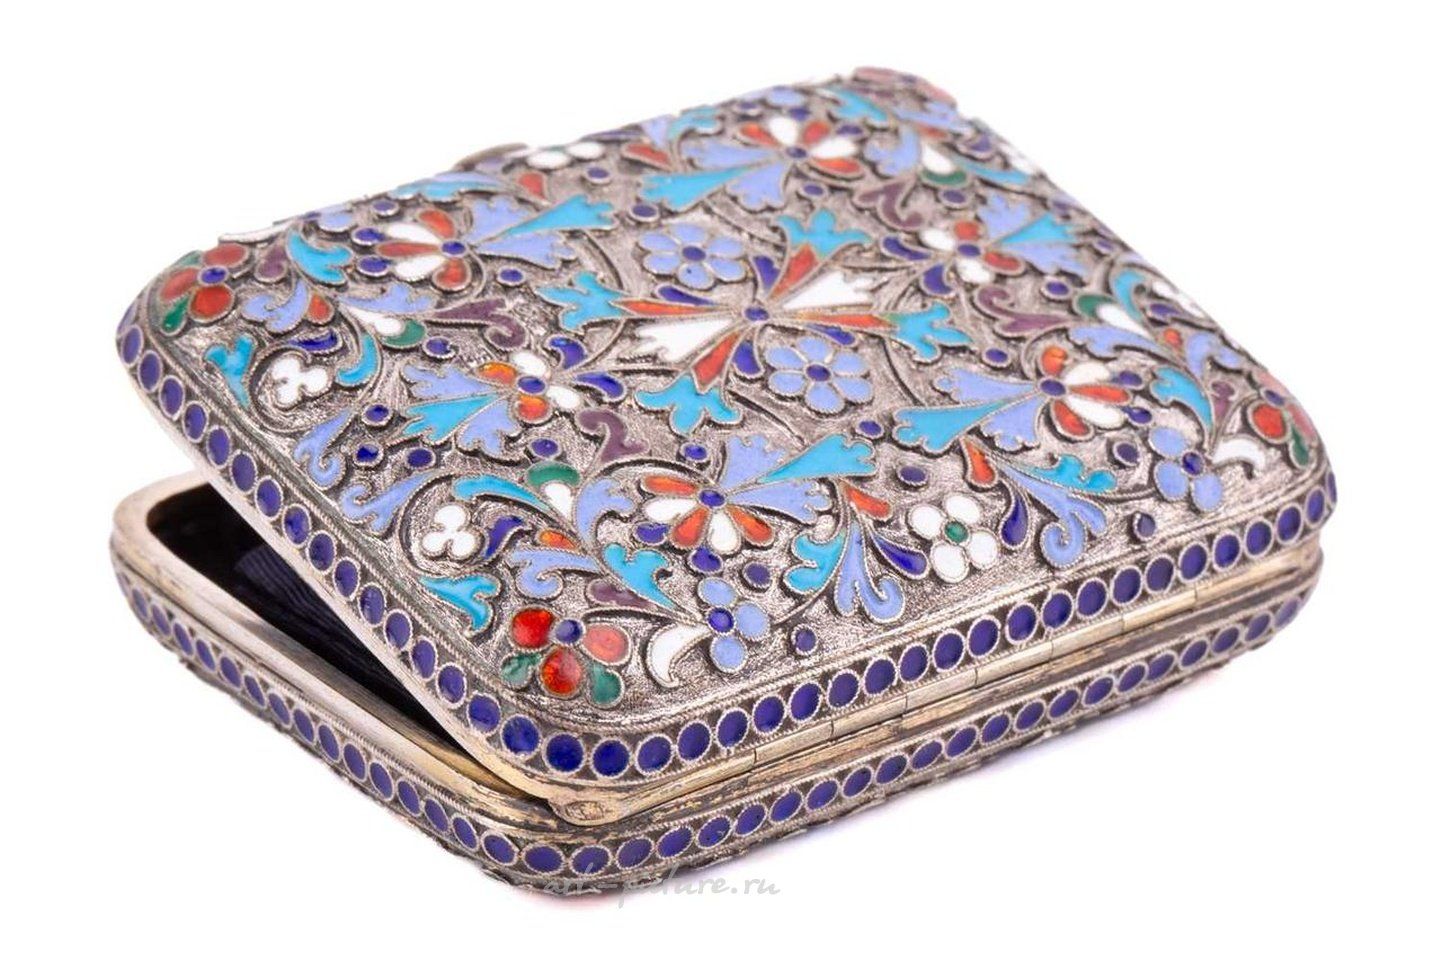 Russian silver , A Russian silver and cloisonné enamel purse, circa 1880, recently acquired from a private collection.